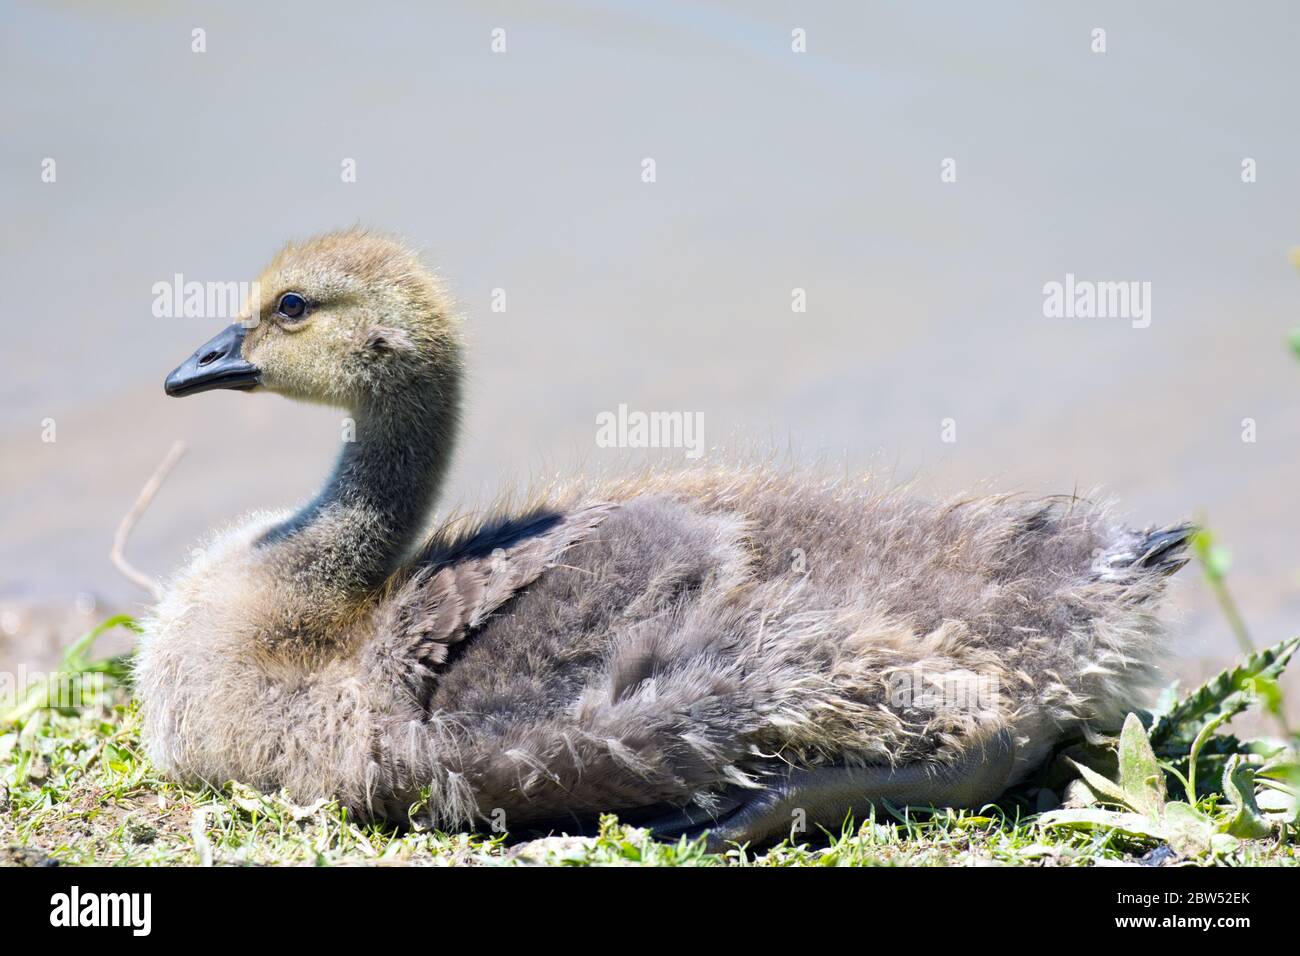 A young immature Canada Goose (gosling), resting beside a pond in Ontario, Canada. Stock Photo